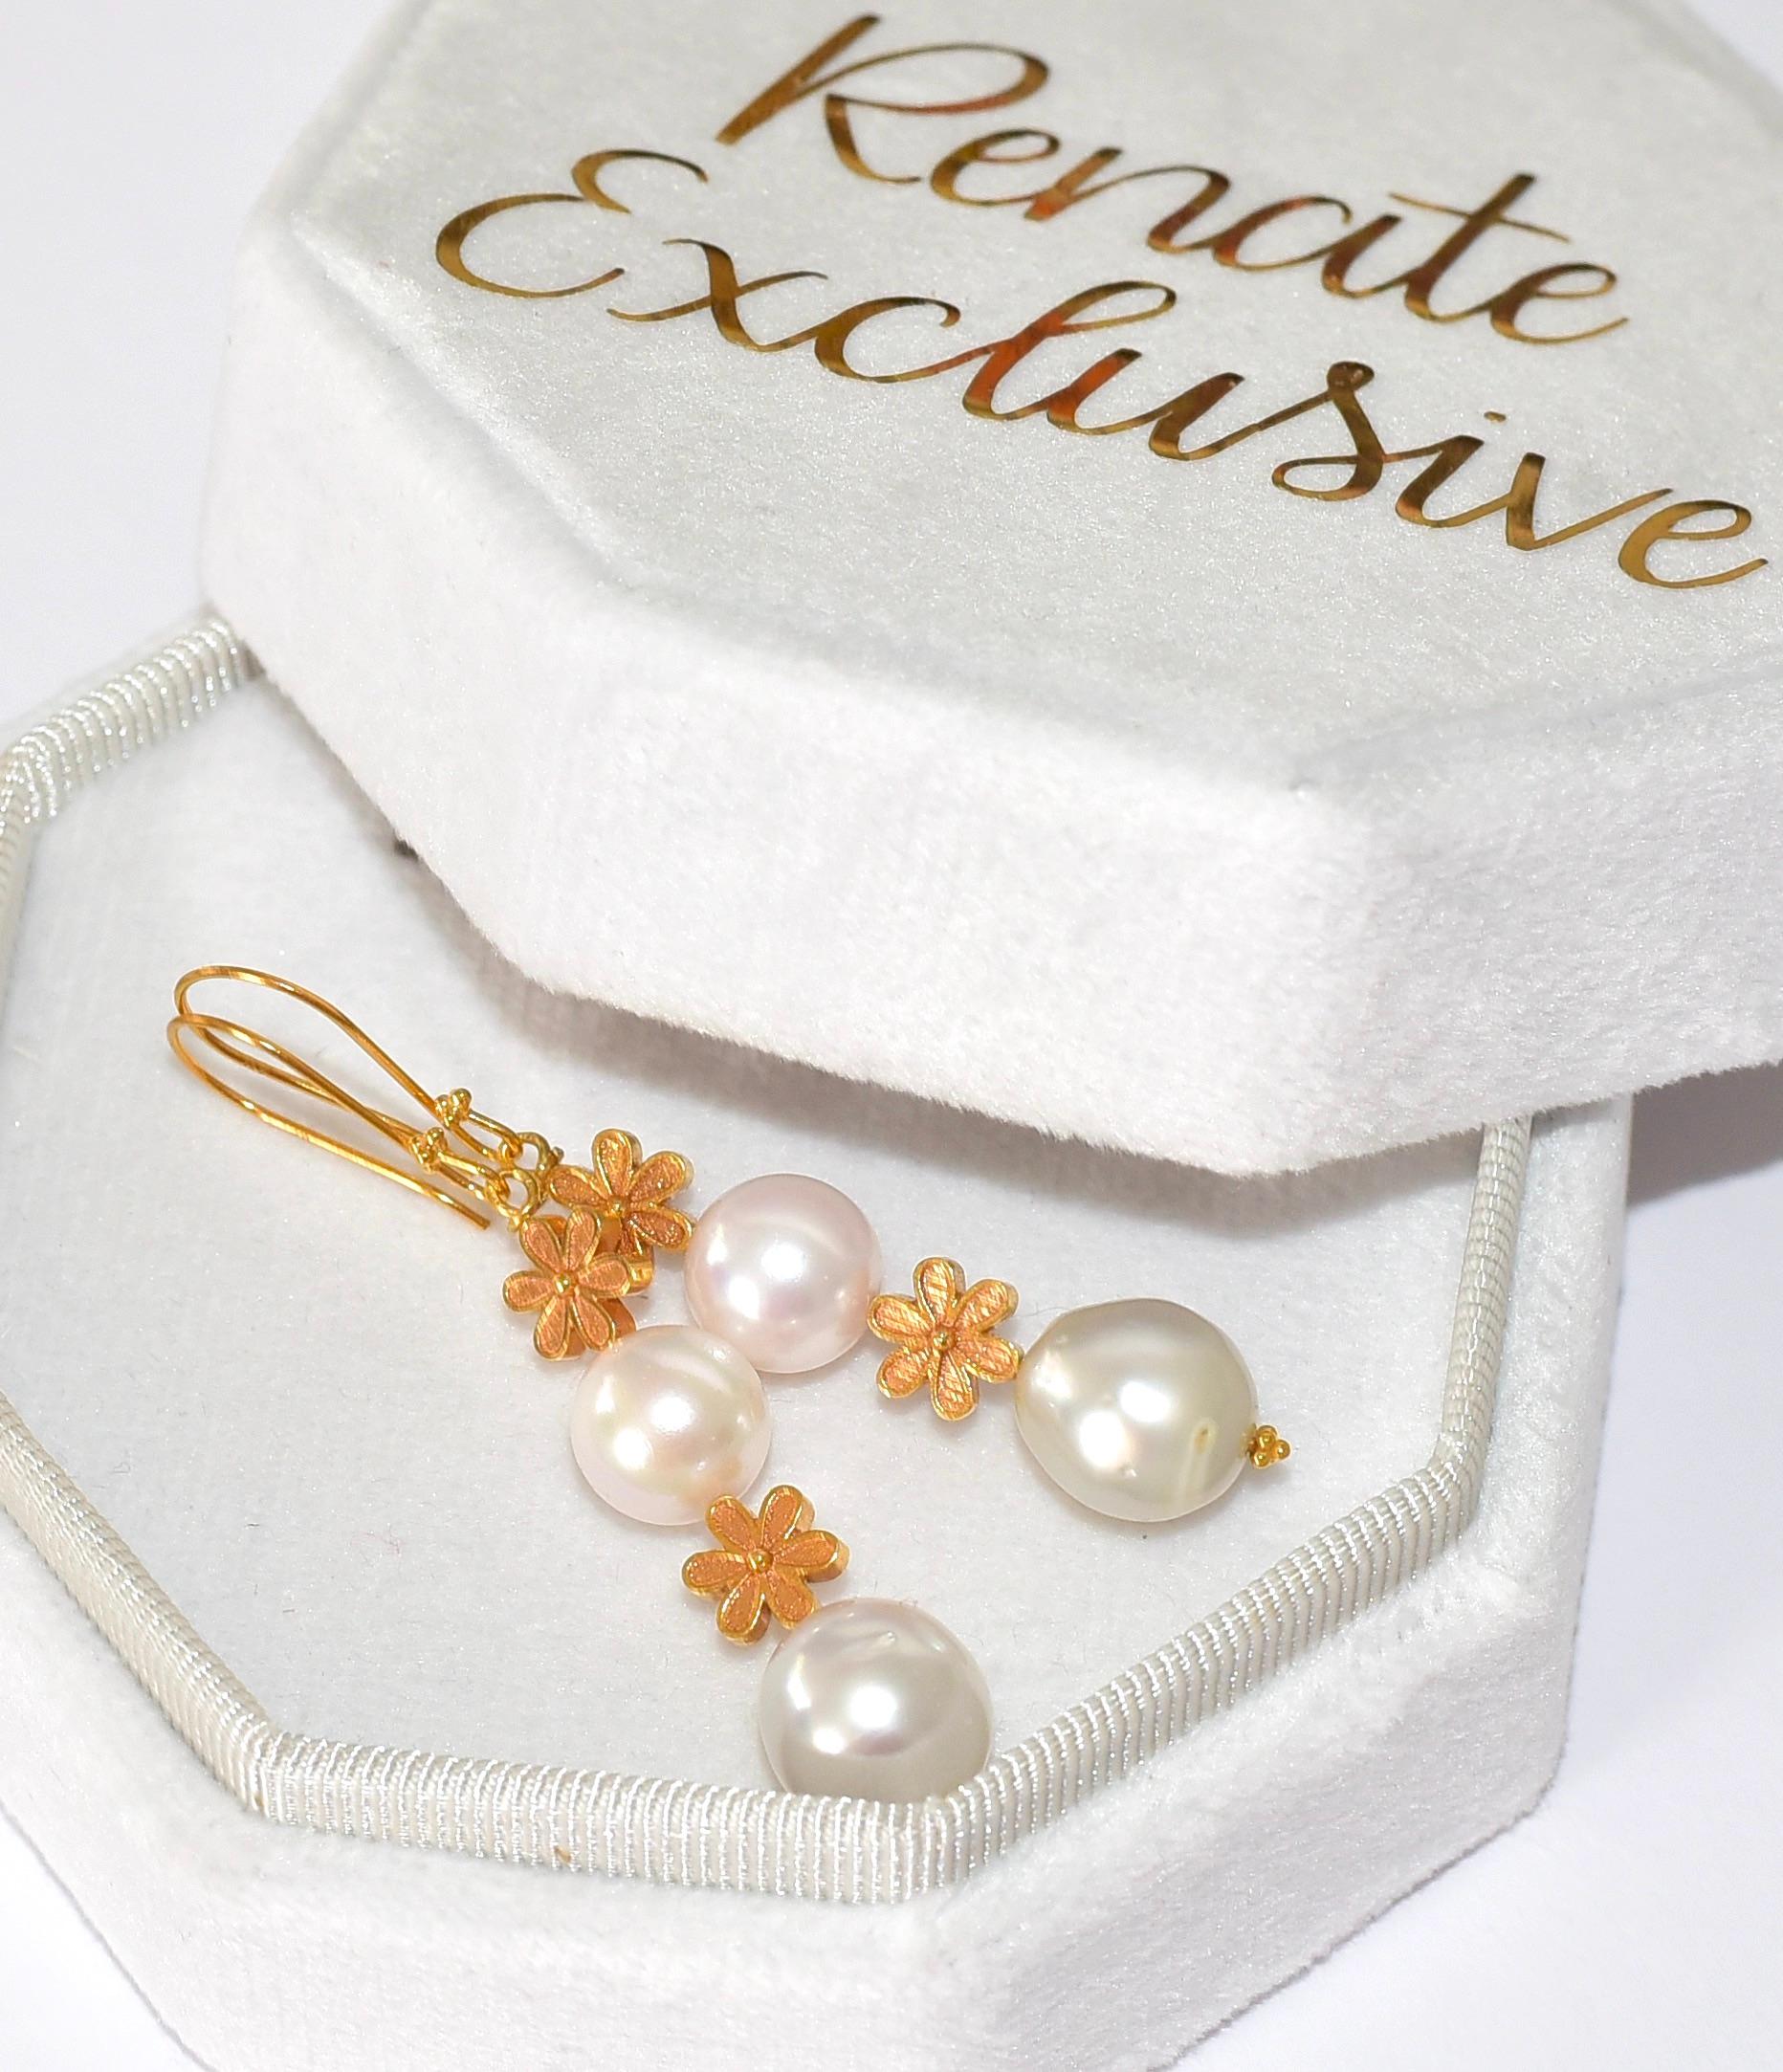 White South Sea Cultured Pearl ( 10mm ), Akoya pearl (9mm) with lovely cute 18K Solid Yellow Gold flower charm. Classic and timeless. Simple, yet extraordinary luxury for everyday wear! 

Length: 2 inches
Metal: 18K Solid Yellow Gold
